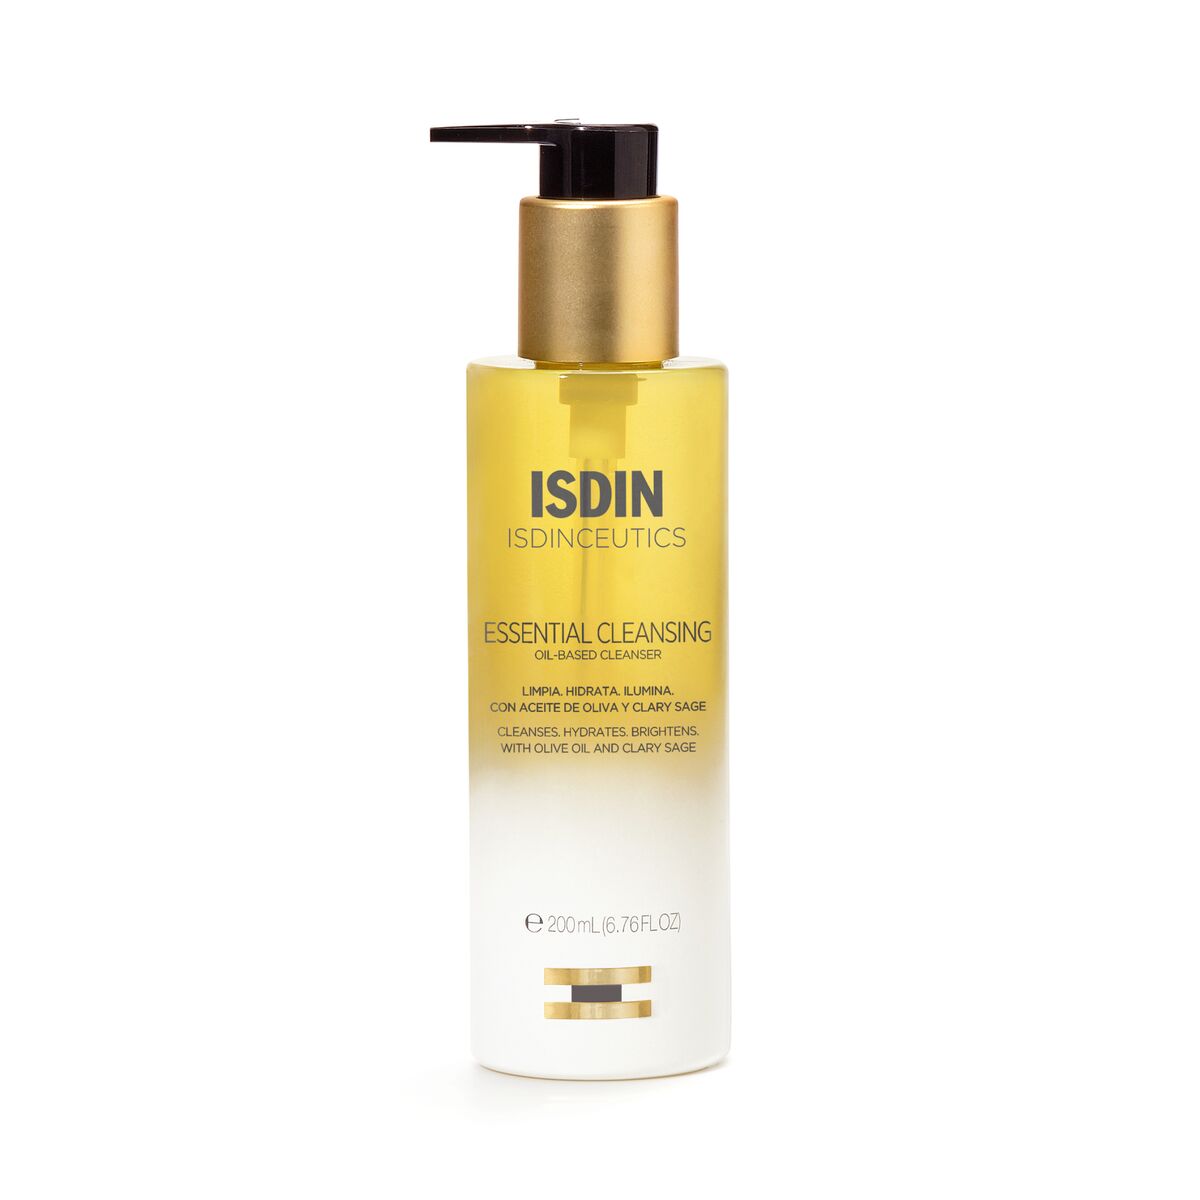 ISDIN Essential Cleansing (200ml)